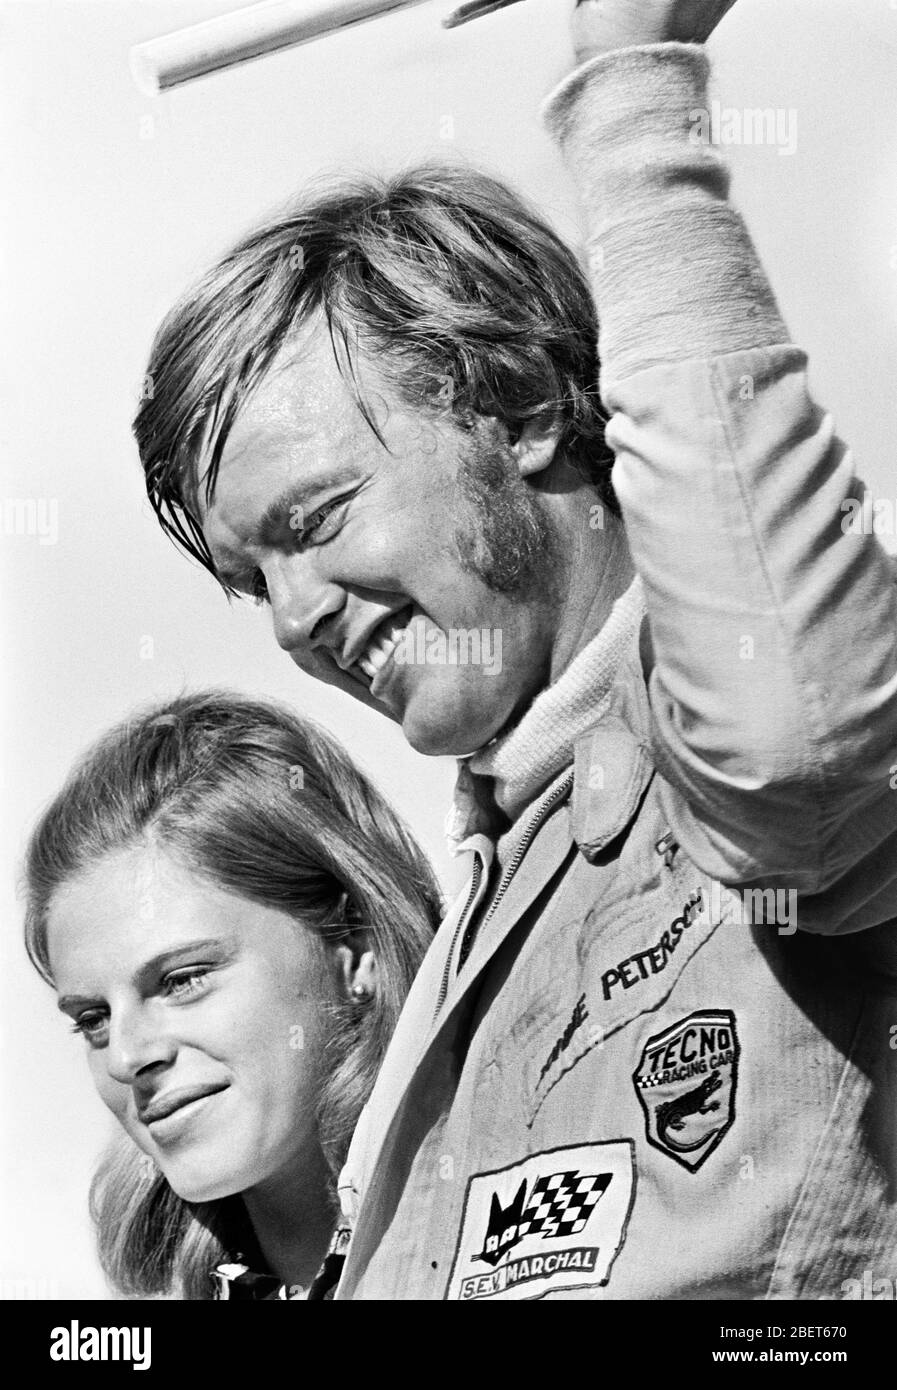 Ronnie Peterson standing on the podium after winning Formula 3 race in Karlskoga Stock Photo